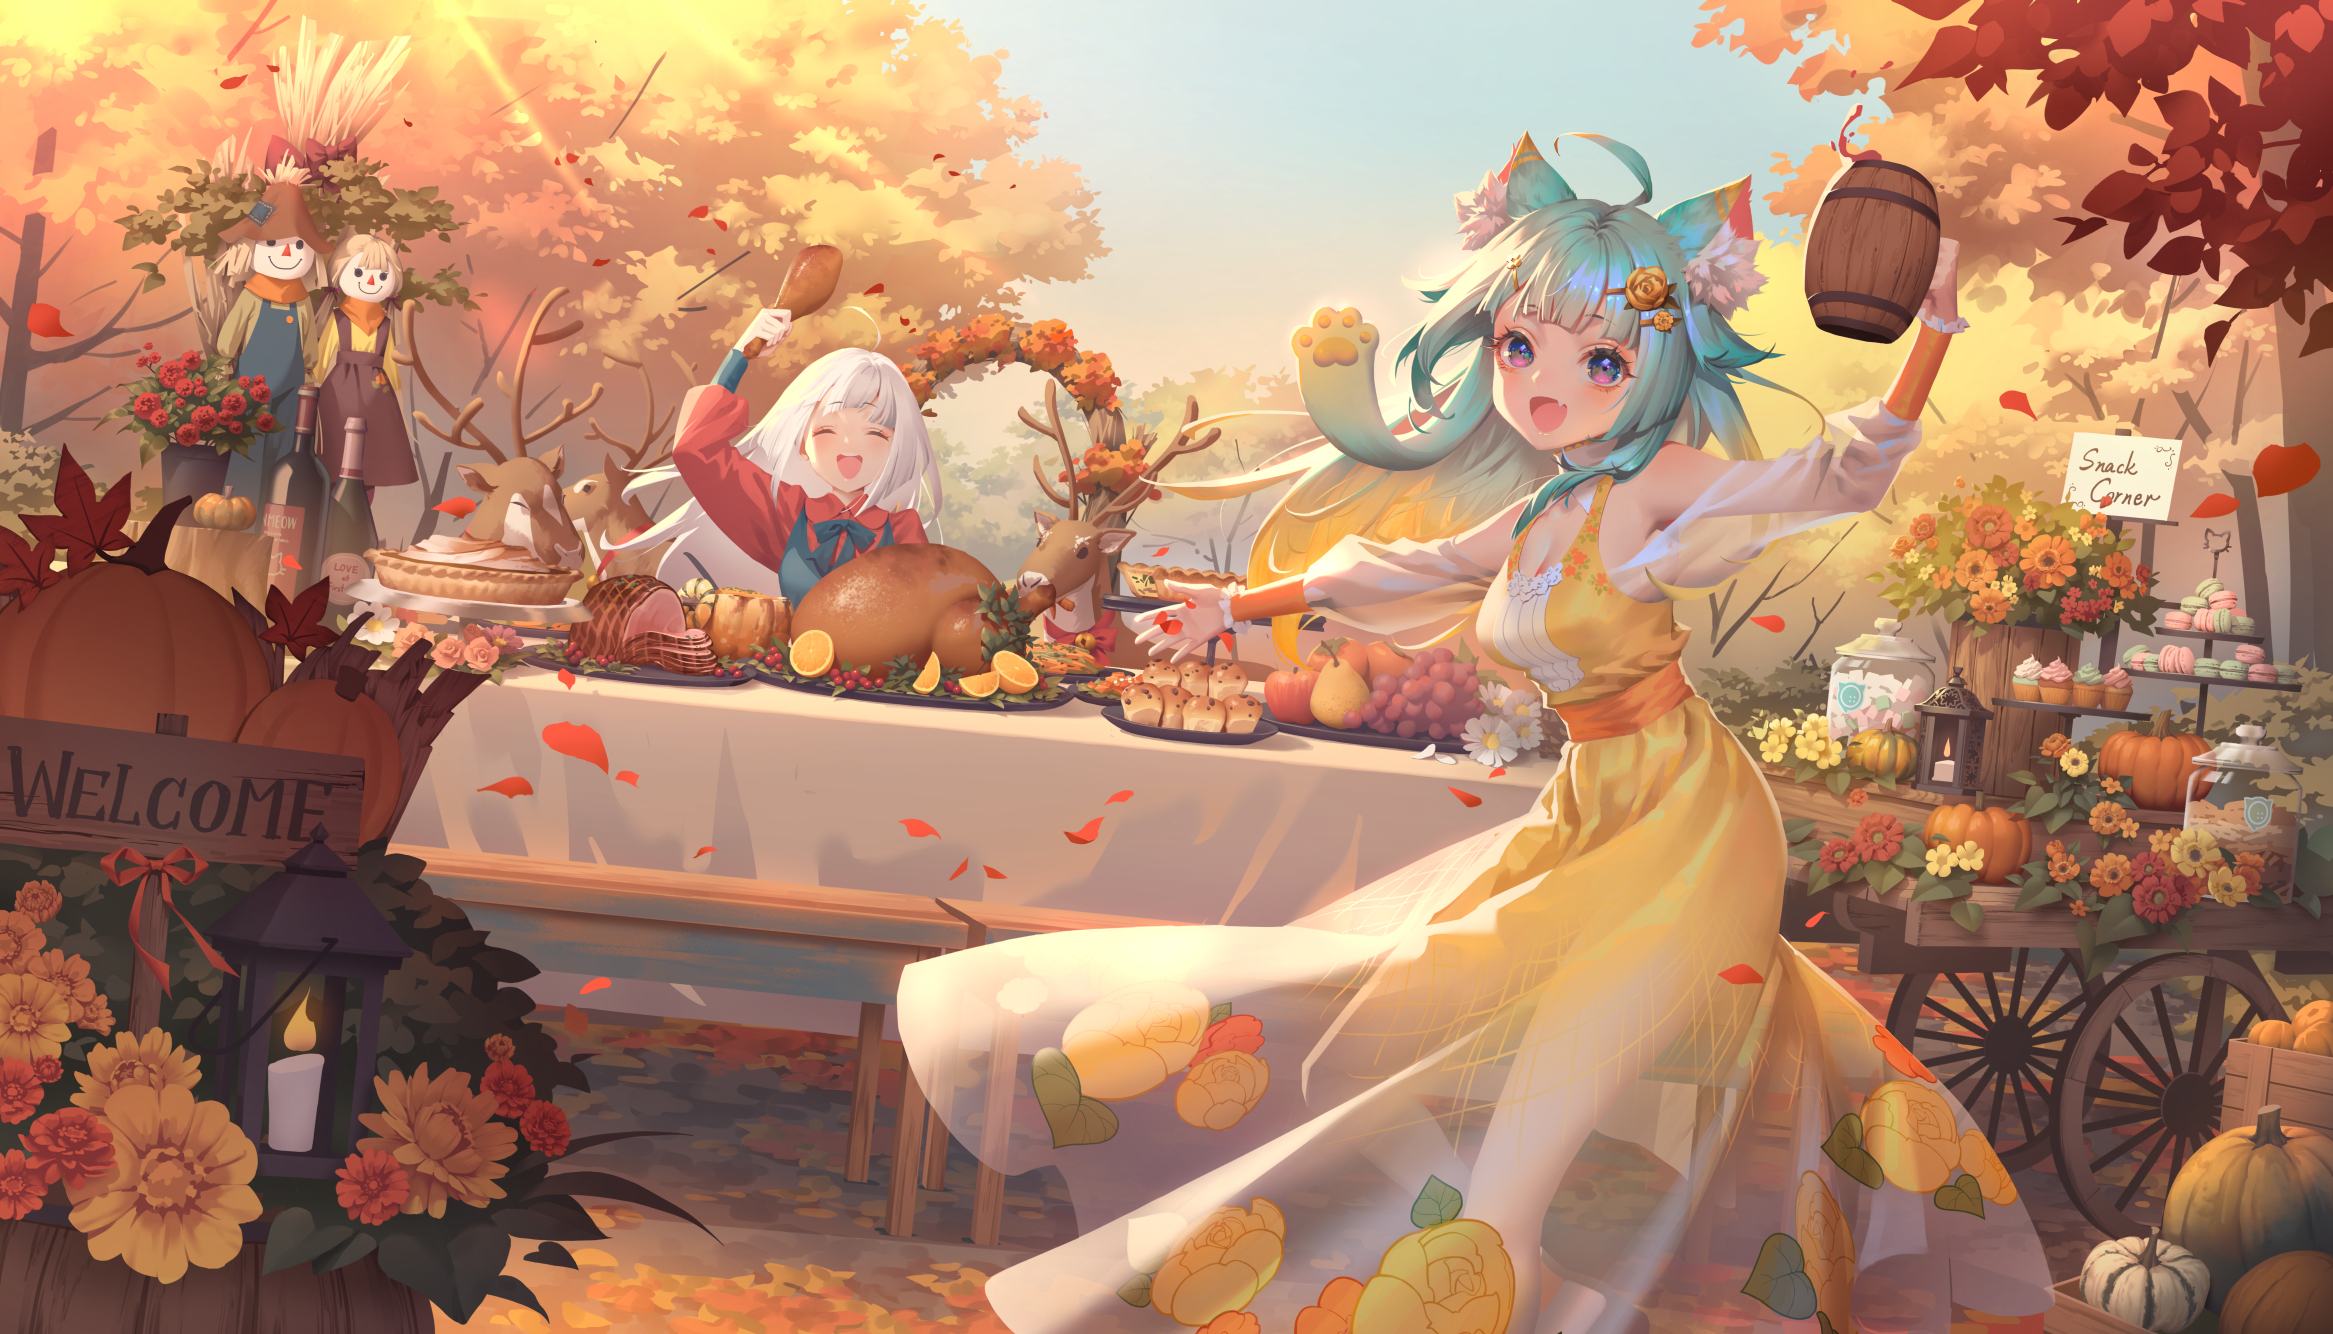 Autumn Anime Aesthetic Wallpapers  Wallpaper Cave